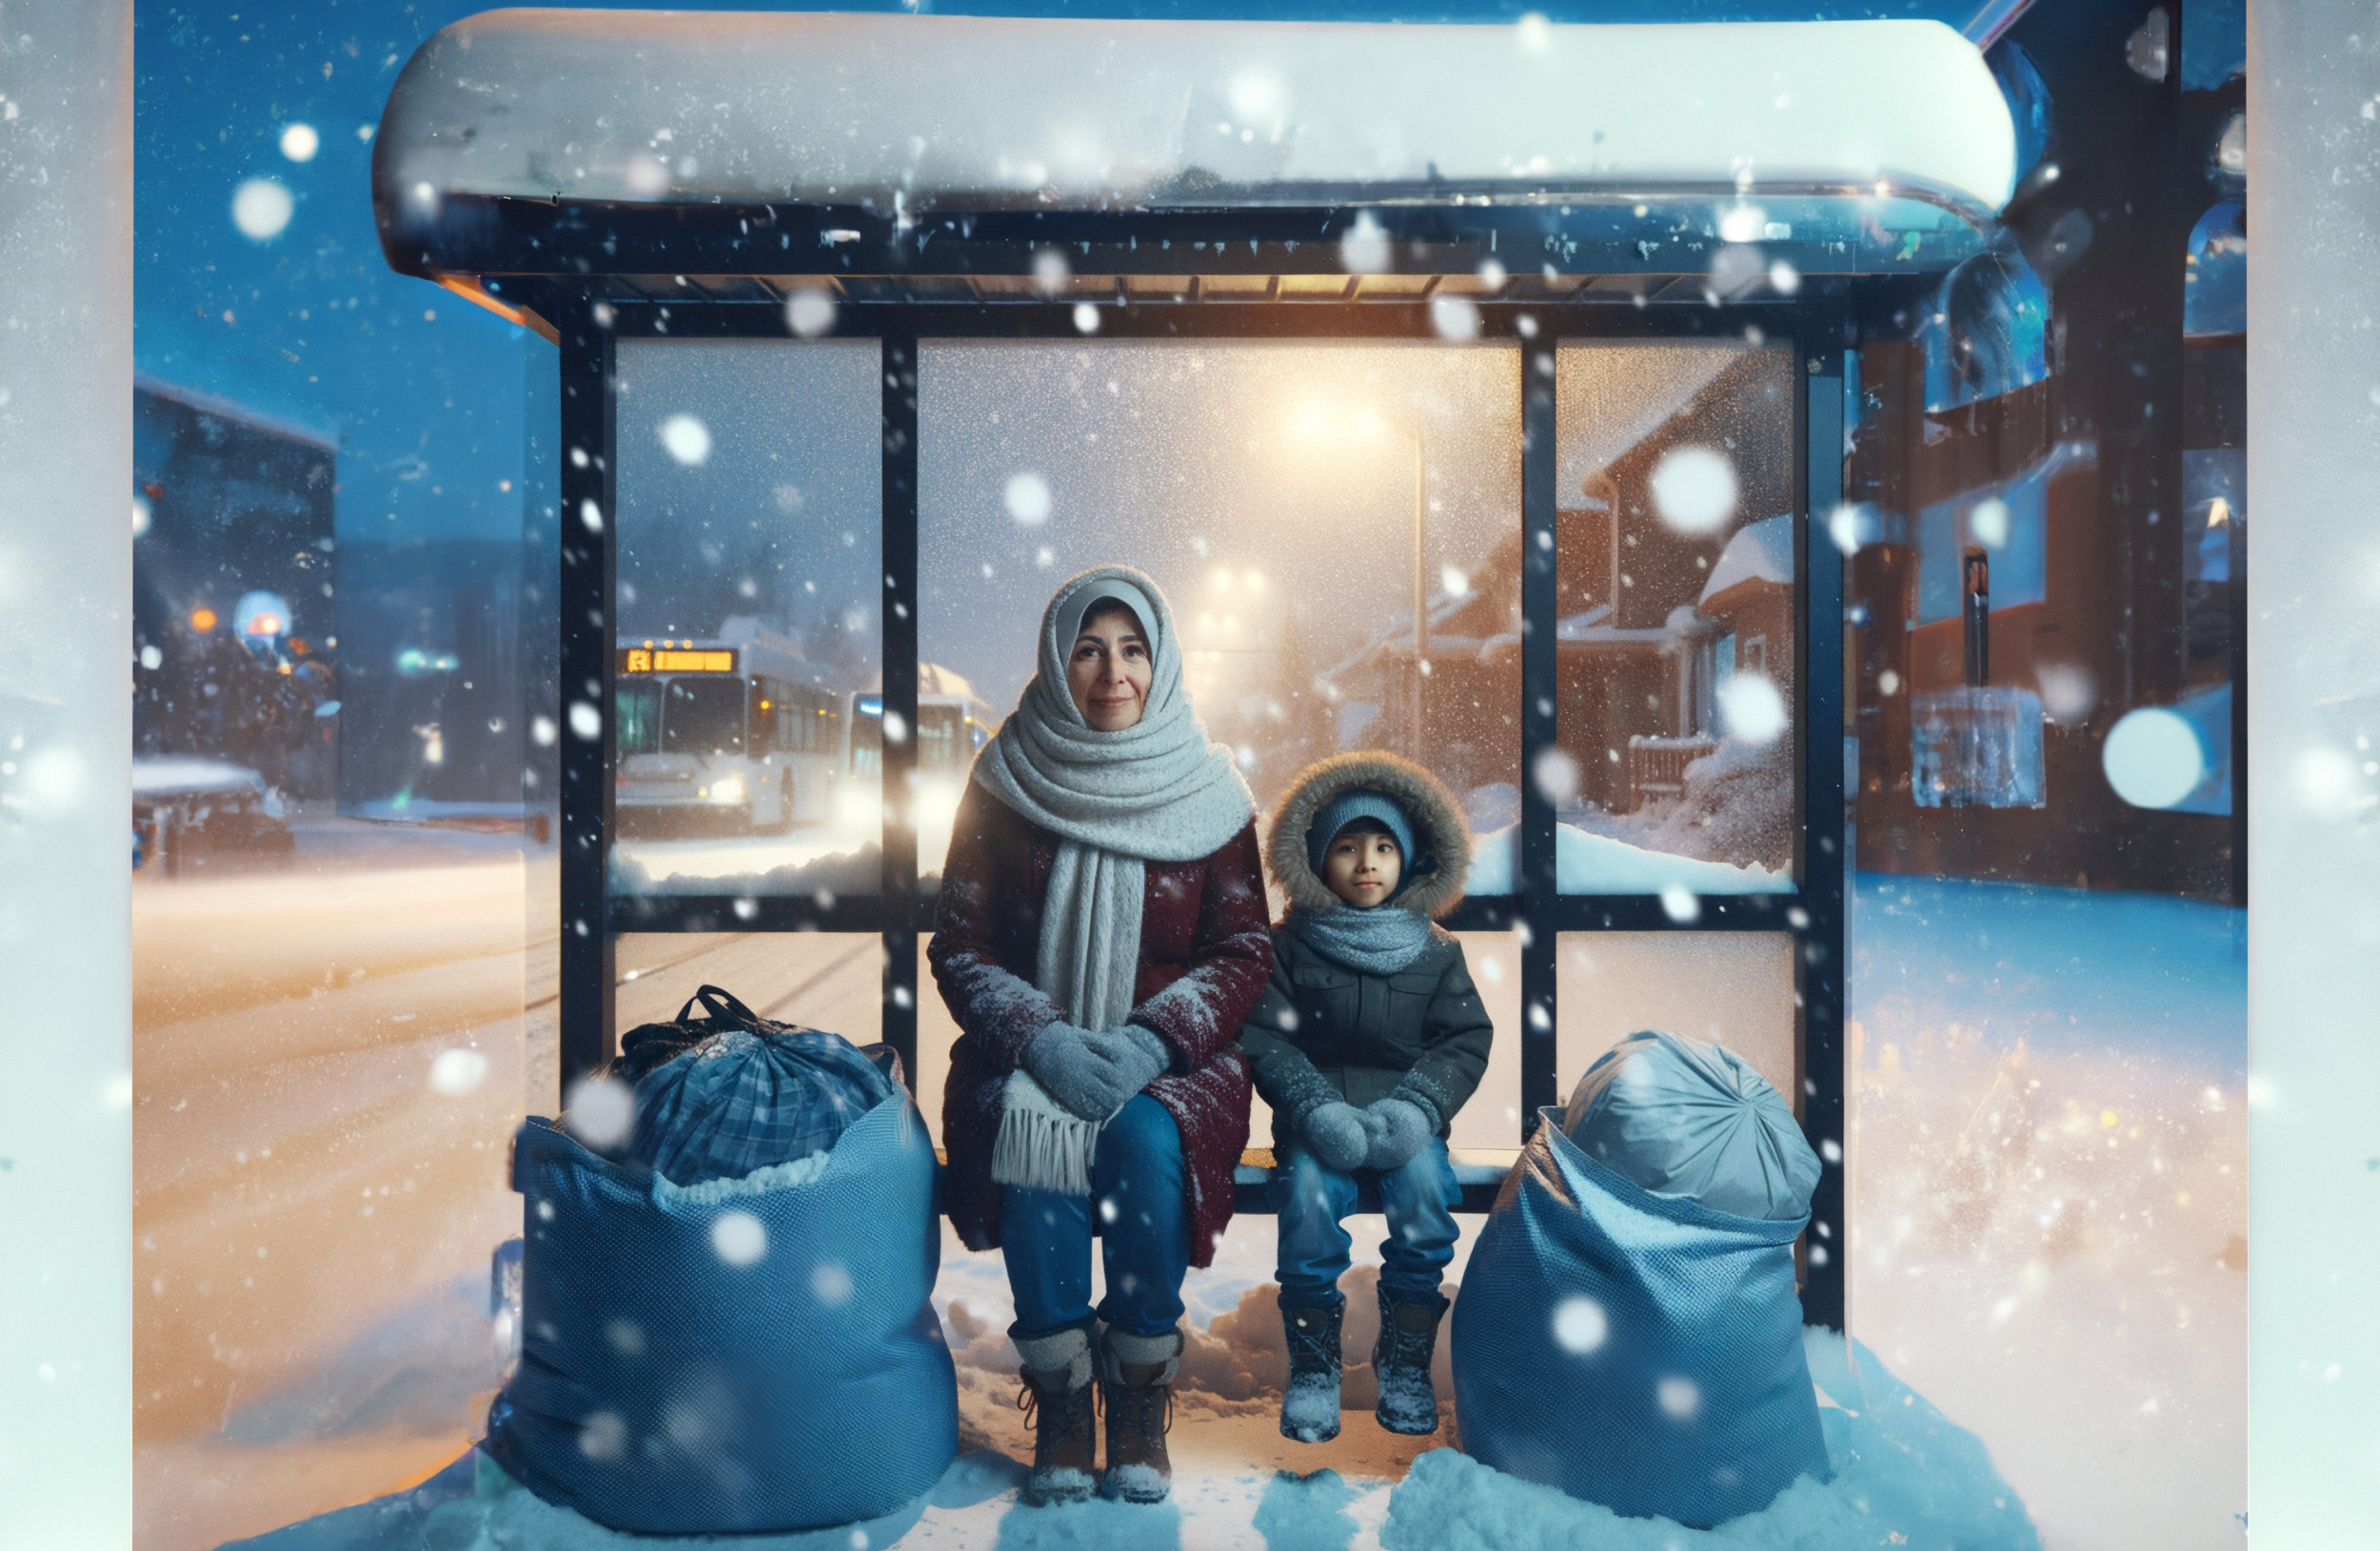 Homelessness in Massachusetts: Woman and young boy in heavy winter clothing sit at covered city bus stop at night in heavy snow with two large cloth bags at their feet